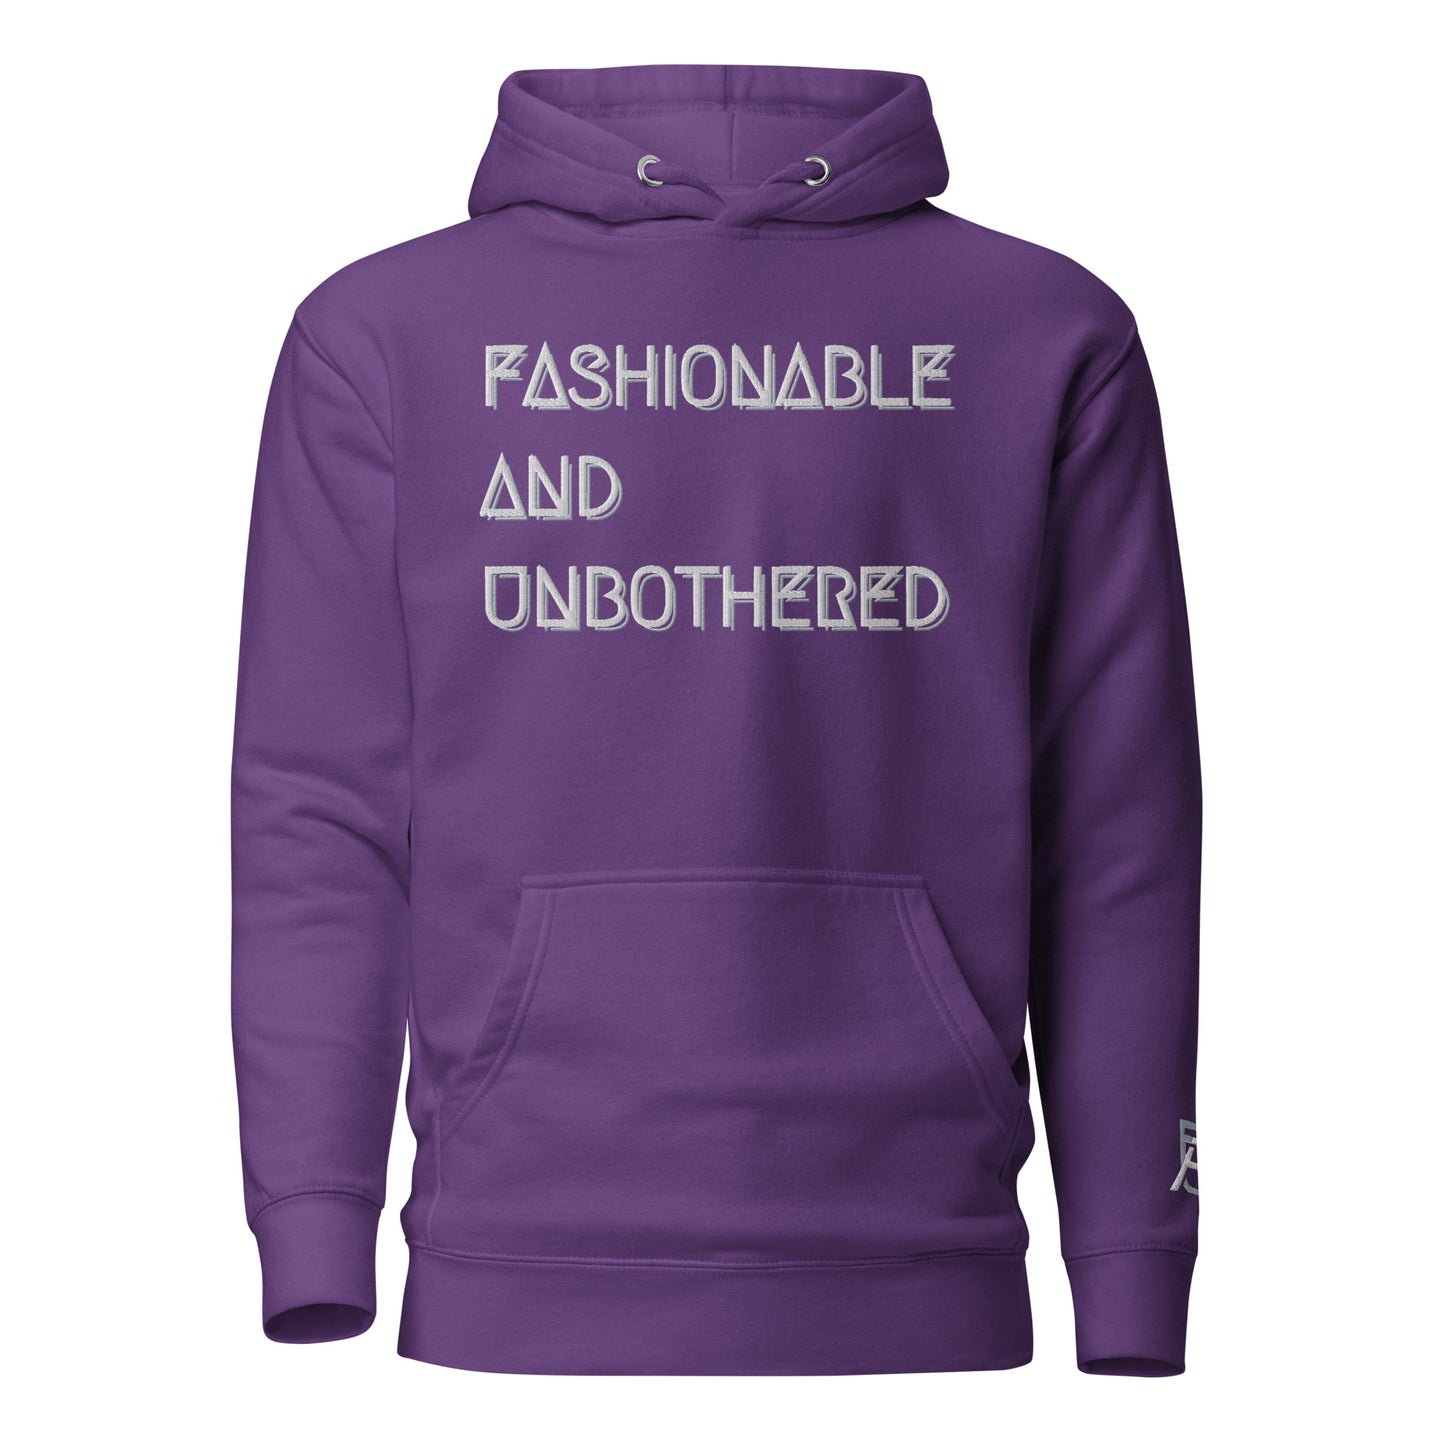 Fashionable and Unbothered’s ® Signature Hoodie